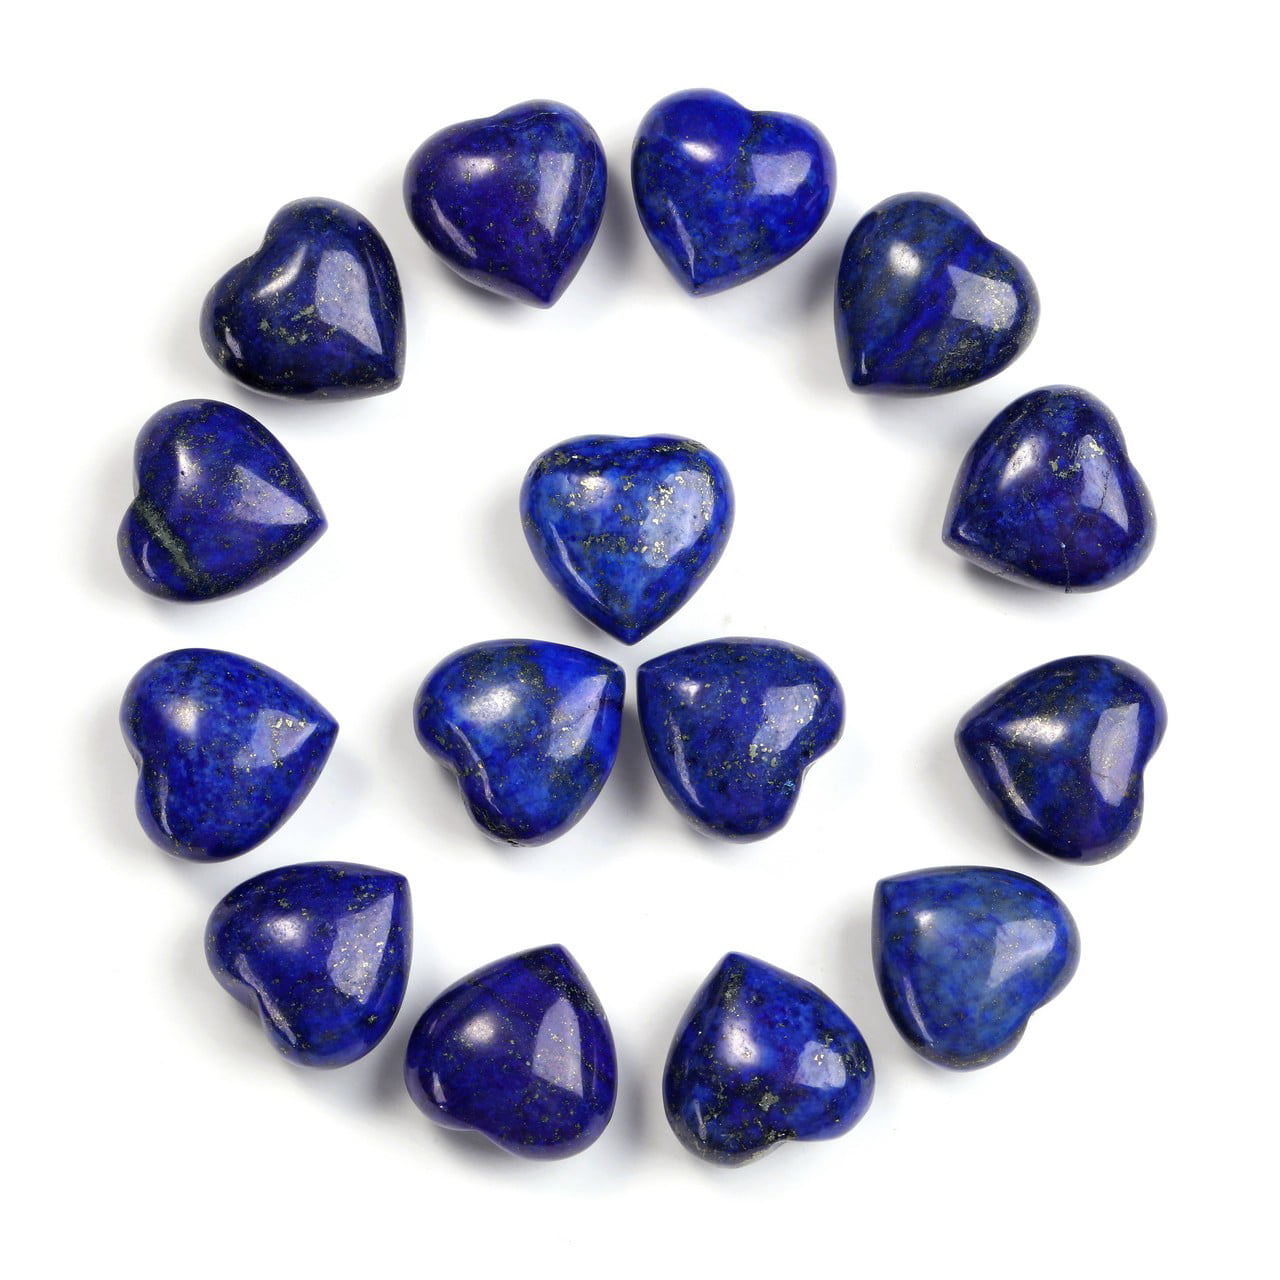 Large heart shaped gem stone bowl perfect valentine's day gift for your fav Rock hound.